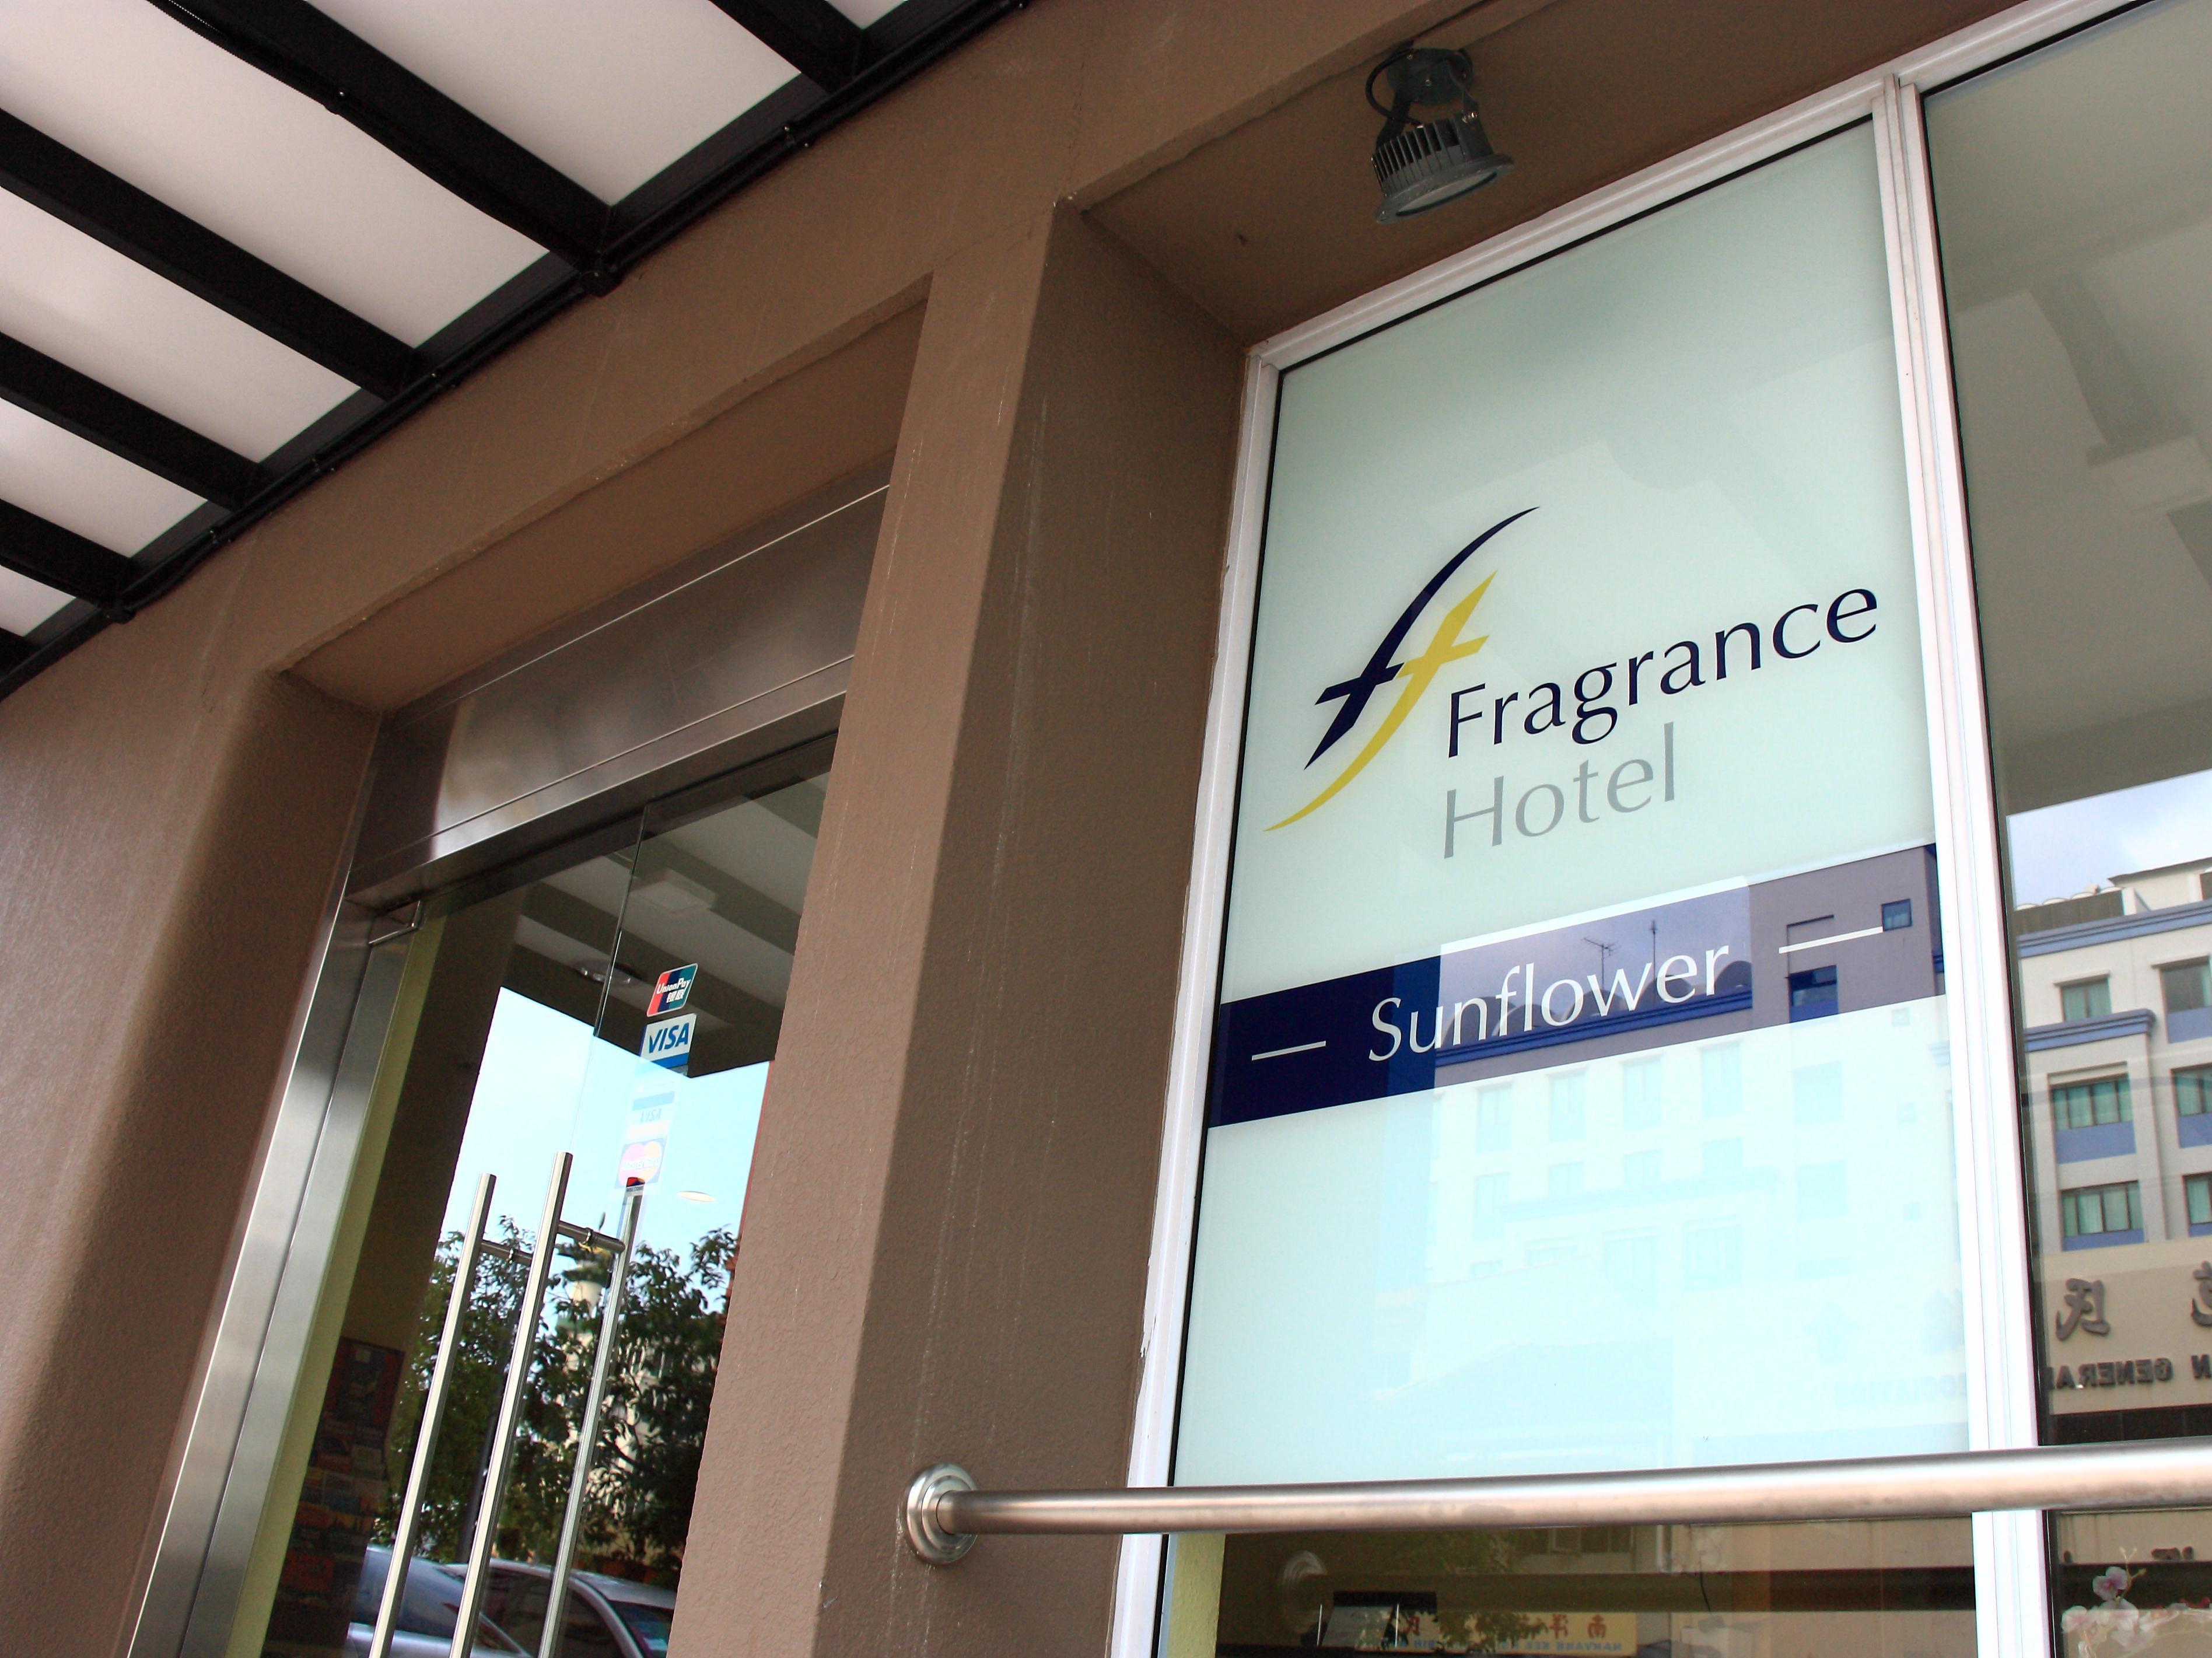 Fragrance Hotel - Sunflower Singapore FAQ 2016, What facilities are there in Fragrance Hotel - Sunflower Singapore 2016, What Languages Spoken are Supported in Fragrance Hotel - Sunflower Singapore 2016, Which payment cards are accepted in Fragrance Hotel - Sunflower Singapore , Singapore Fragrance Hotel - Sunflower room facilities and services Q&A 2016, Singapore Fragrance Hotel - Sunflower online booking services 2016, Singapore Fragrance Hotel - Sunflower address 2016, Singapore Fragrance Hotel - Sunflower telephone number 2016,Singapore Fragrance Hotel - Sunflower map 2016, Singapore Fragrance Hotel - Sunflower traffic guide 2016, how to go Singapore Fragrance Hotel - Sunflower, Singapore Fragrance Hotel - Sunflower booking online 2016, Singapore Fragrance Hotel - Sunflower room types 2016.